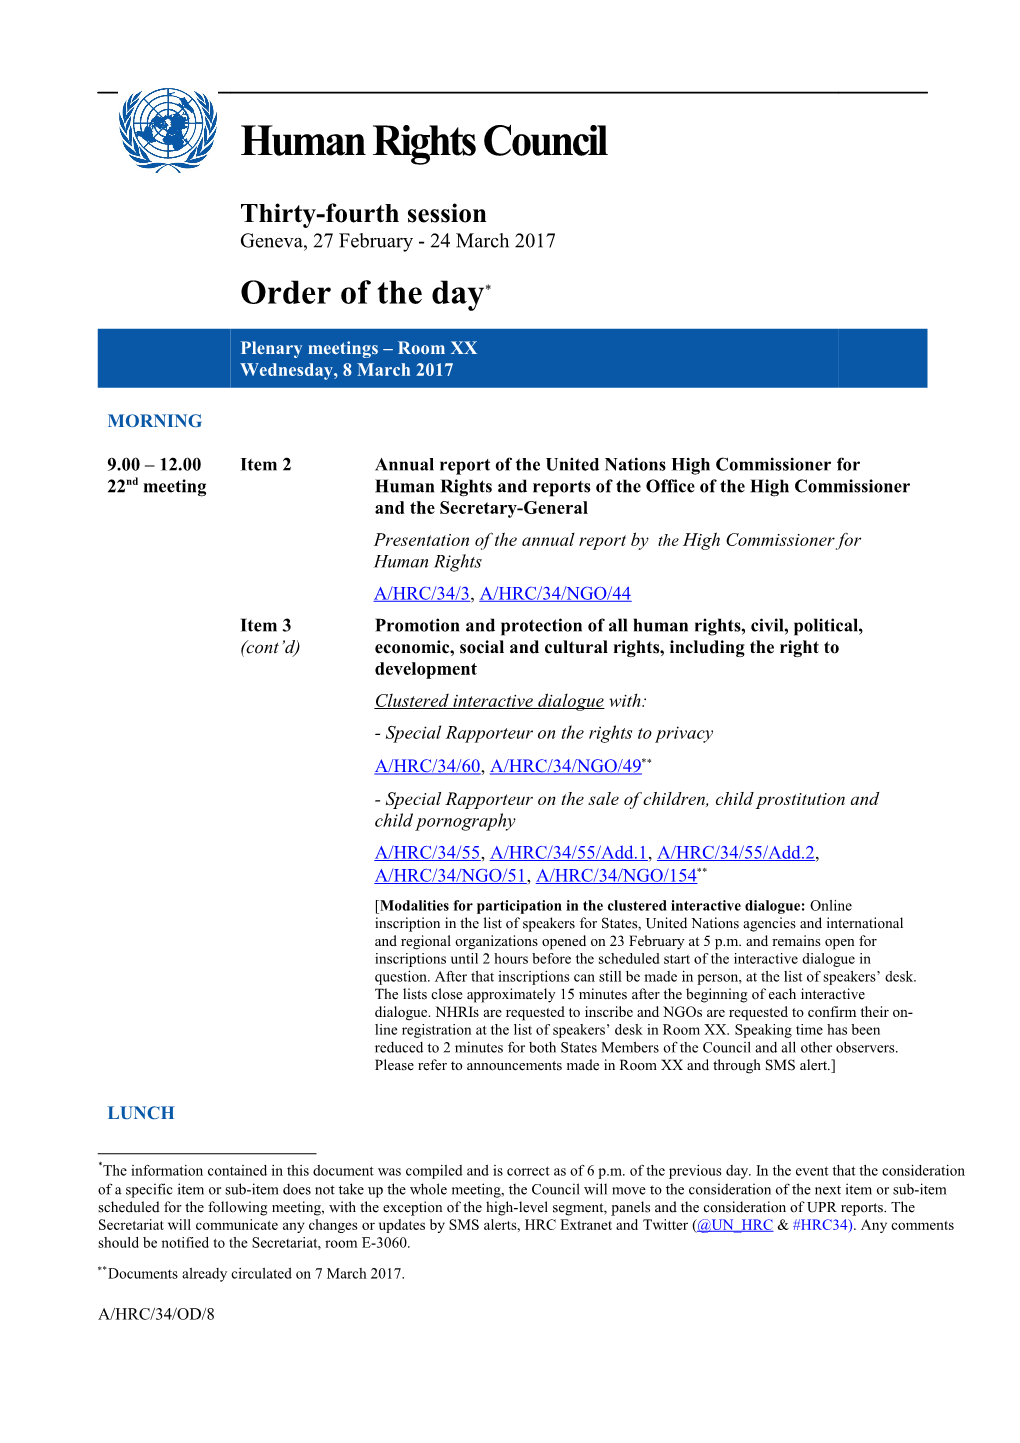 Order of the Day, Wednesday 8 March 2017